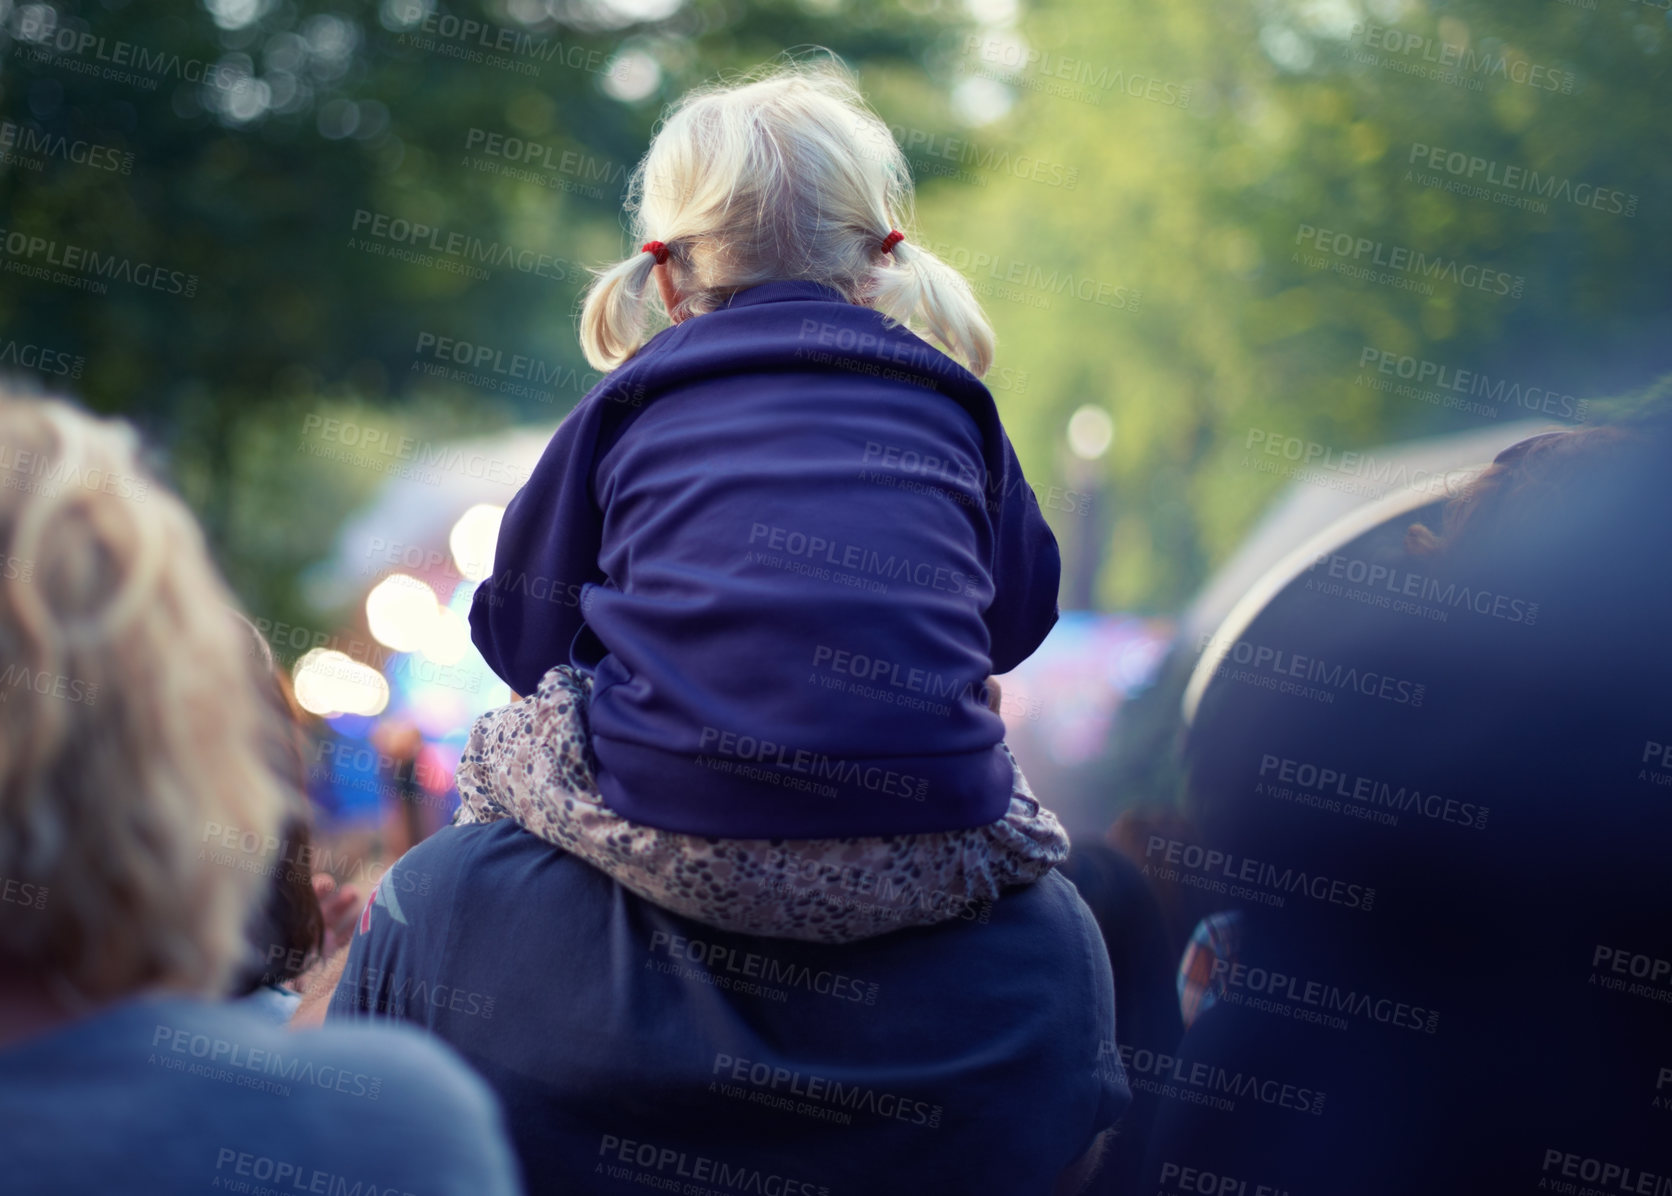 Buy stock photo A little girl sitting on her father's shoulders at an outdoor event